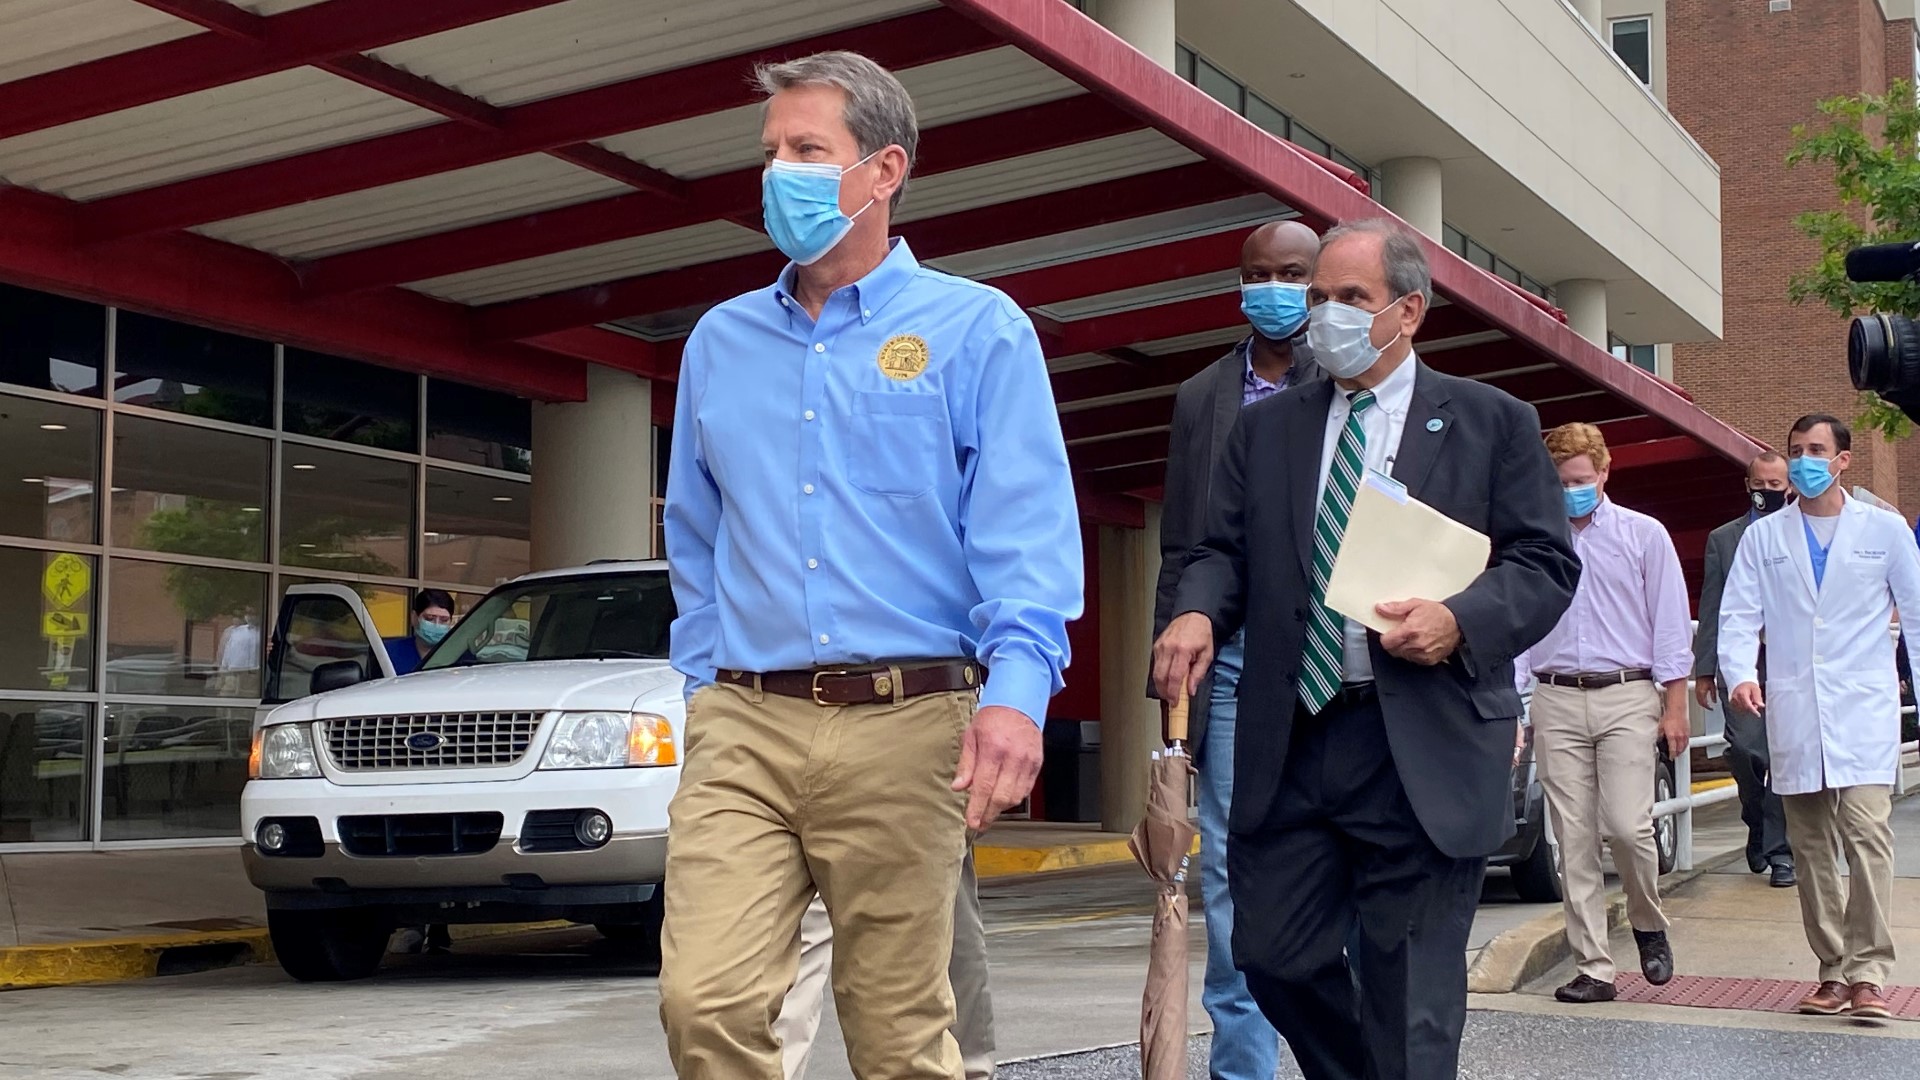 Georgia Governor Brian Kemp visited the Medical Center, Navicent Health in Macon to tour the temporary medical units set up during the COVID-19 pandemic.